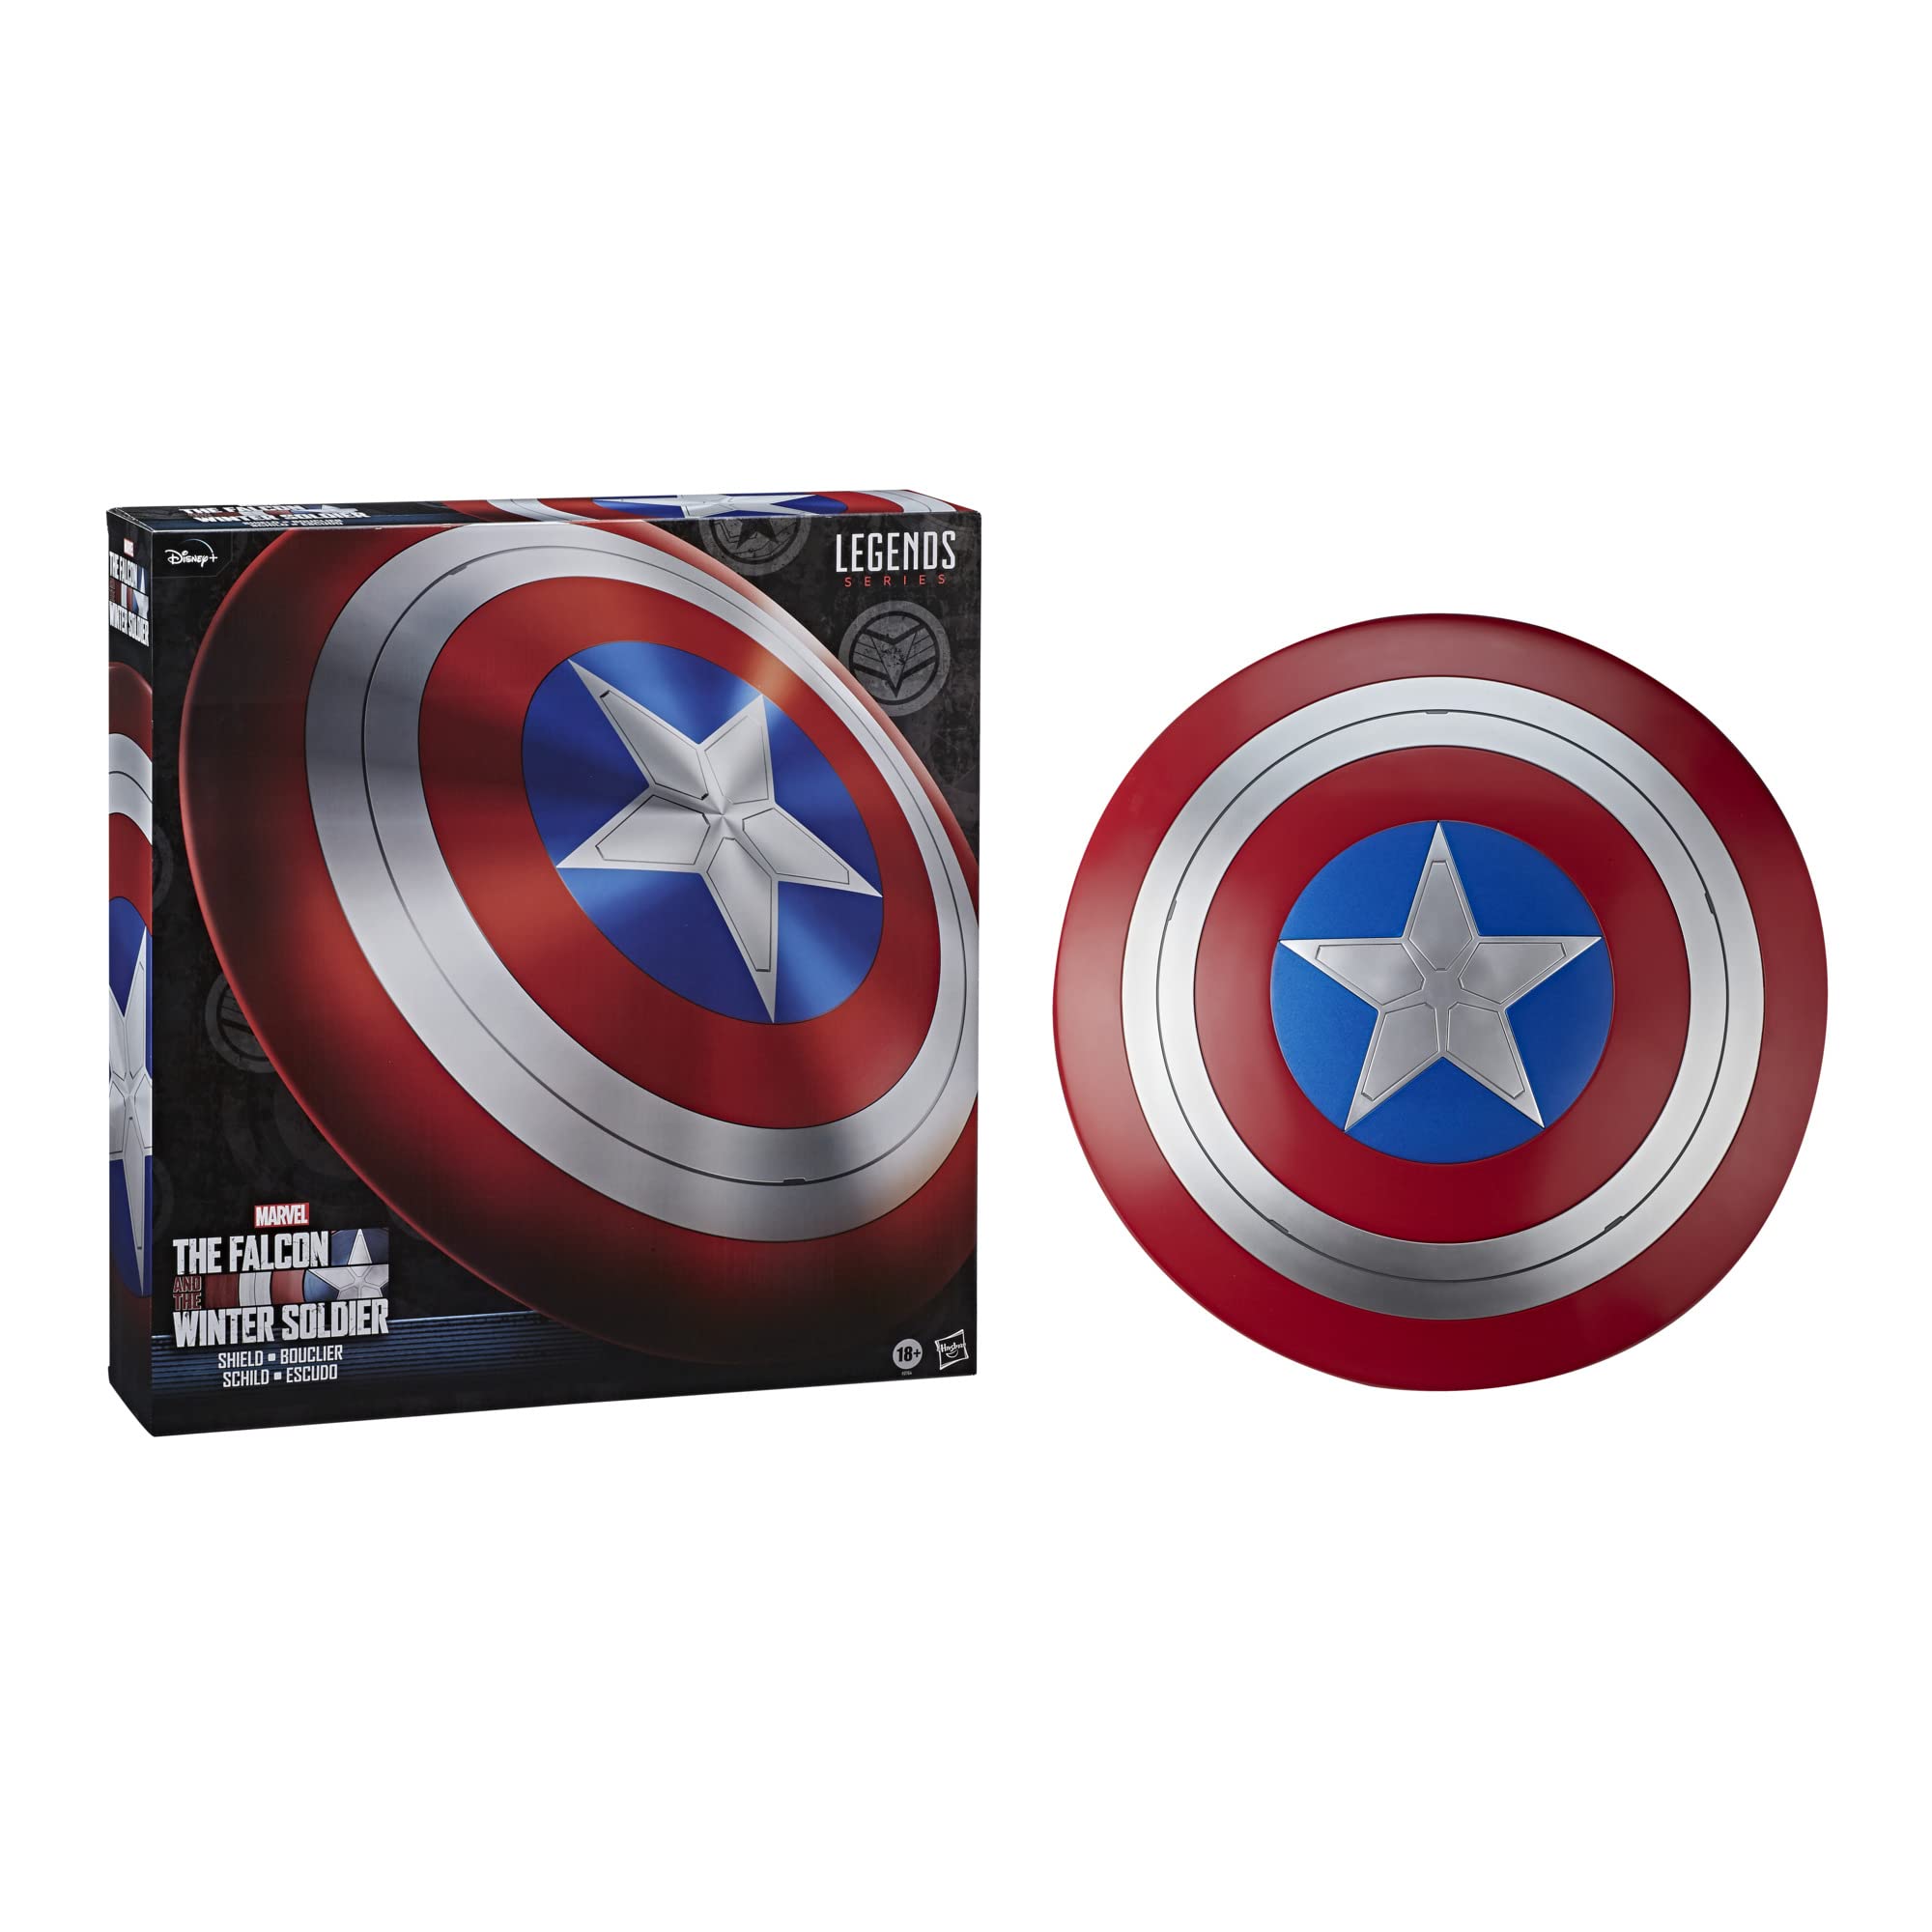 Hasbro Marvel Legends Series Avengers Falcon And Winter Soldier Captain America Premium Role Play Shield -Adult Fan -Costume/Collectible , Red